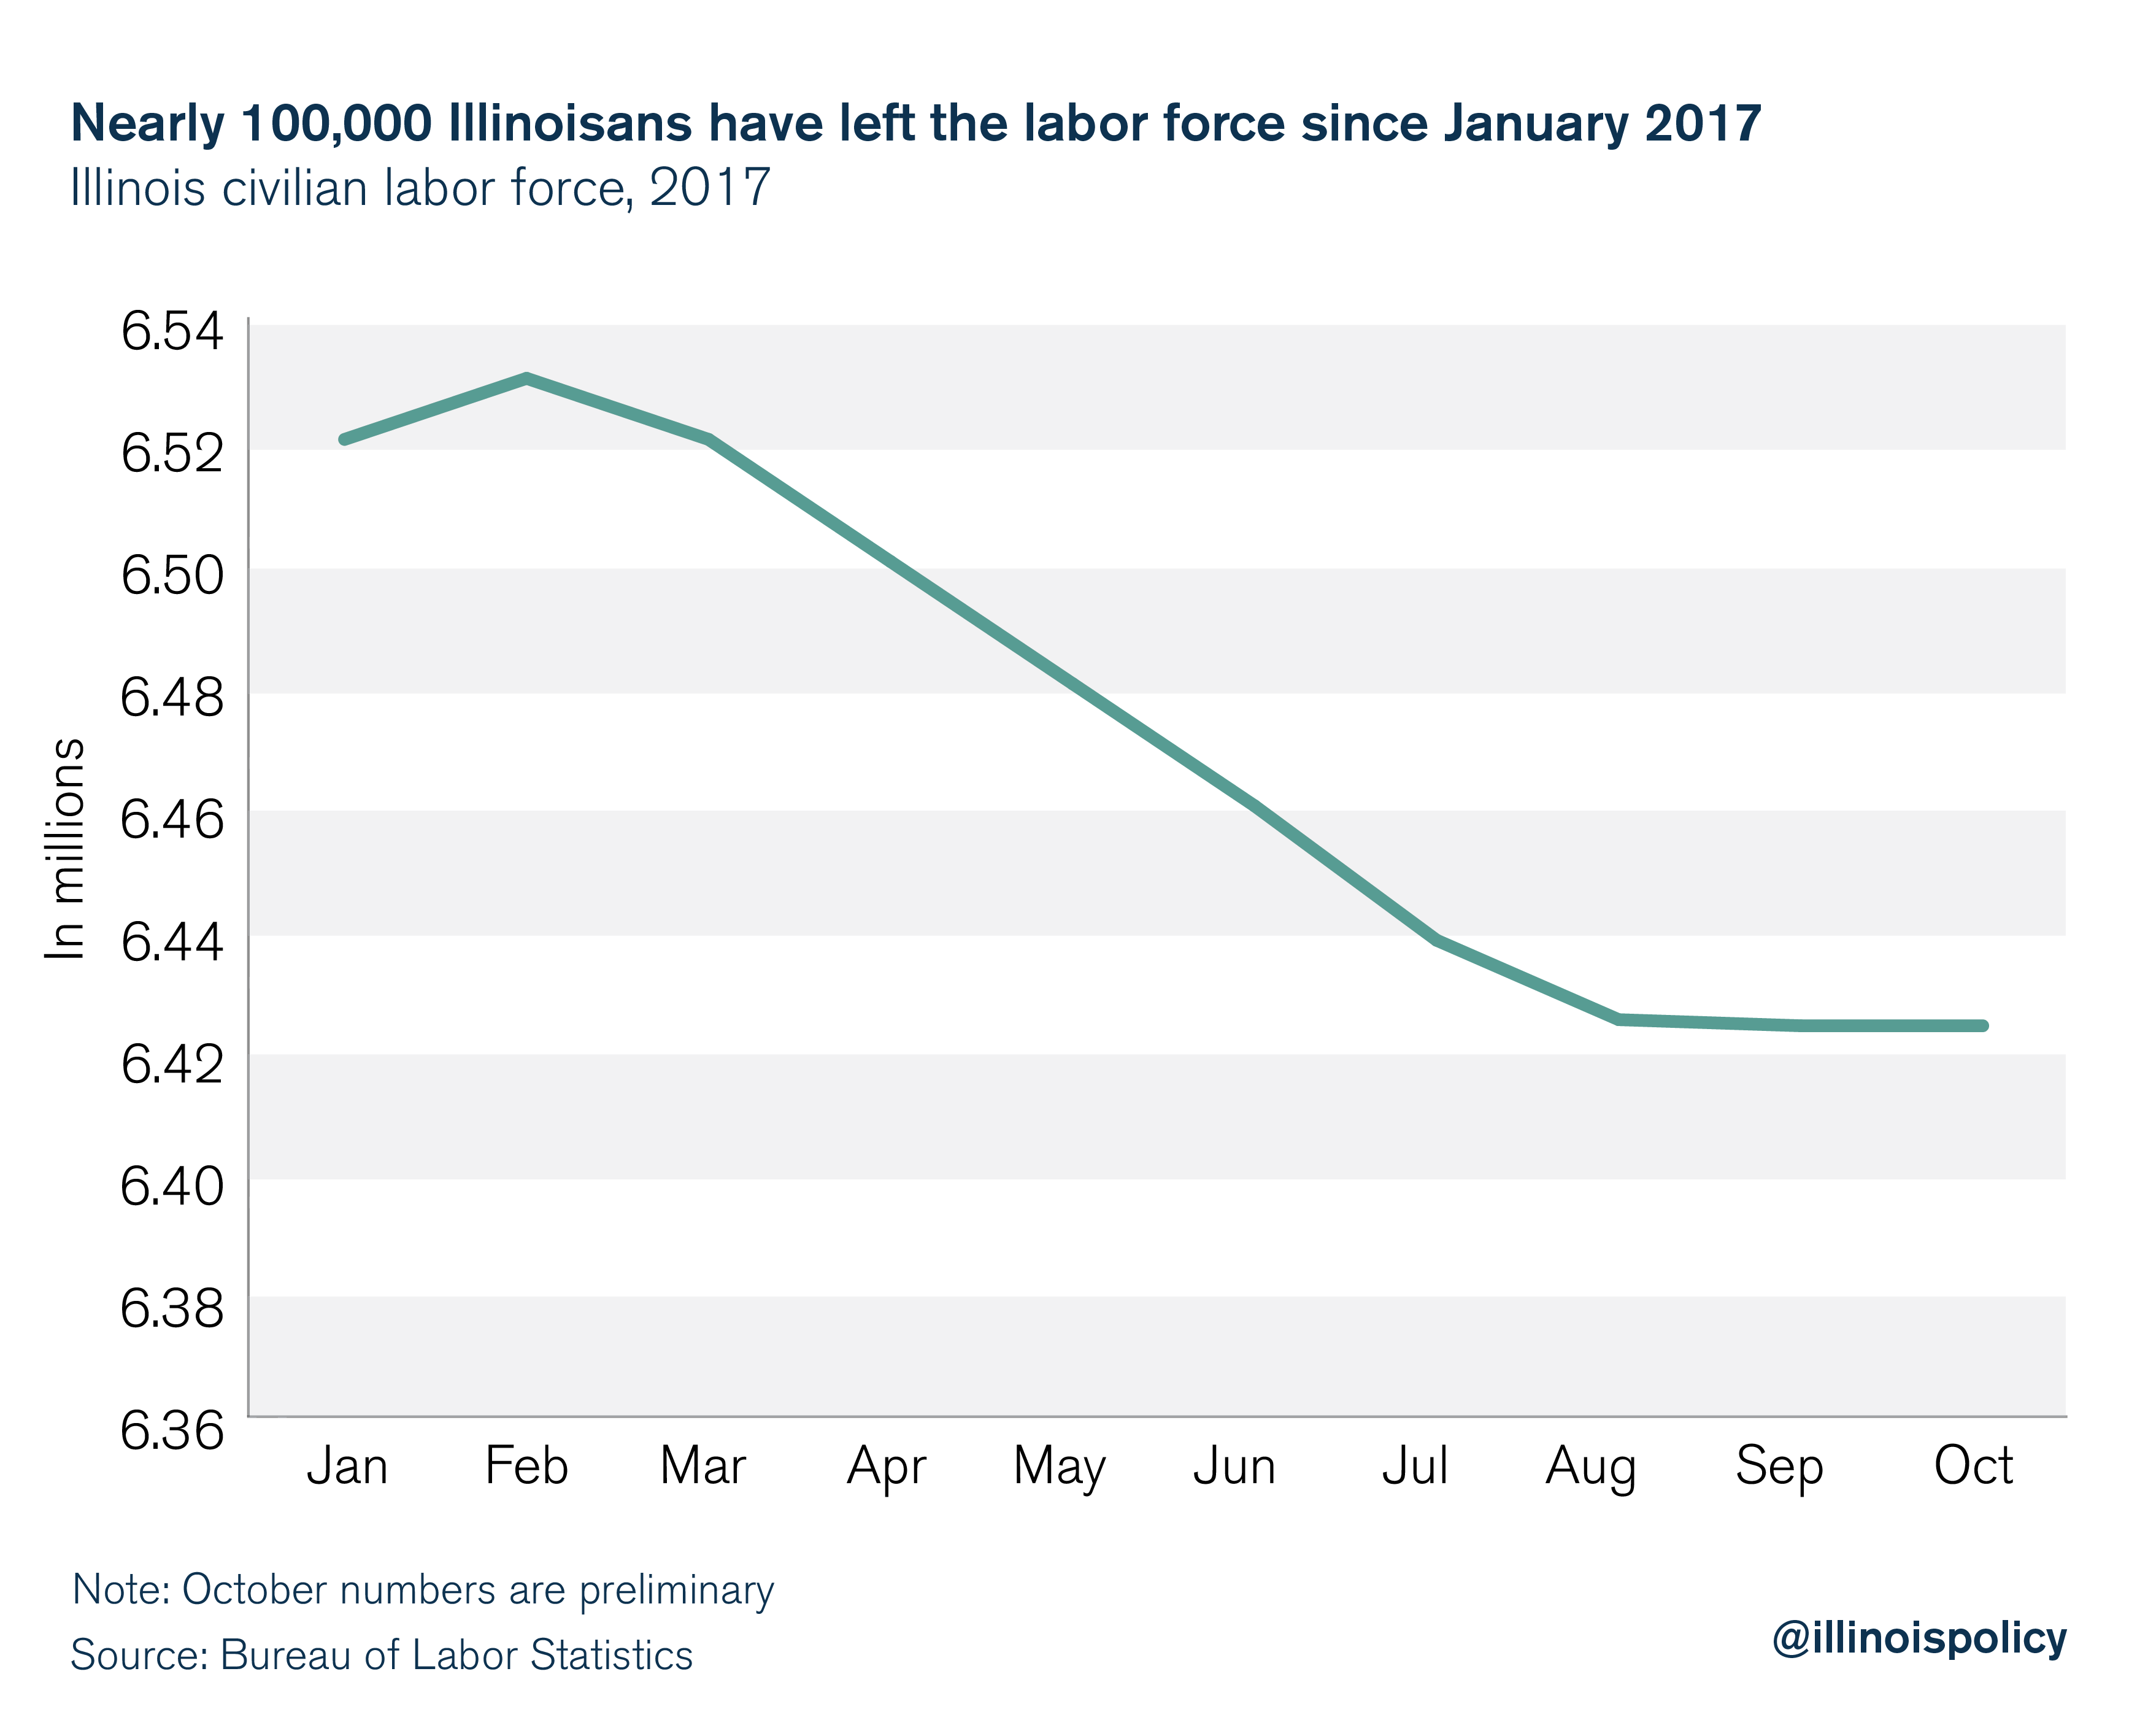 Nearly 100,000 Illinoisans have left the labor force since January 2017